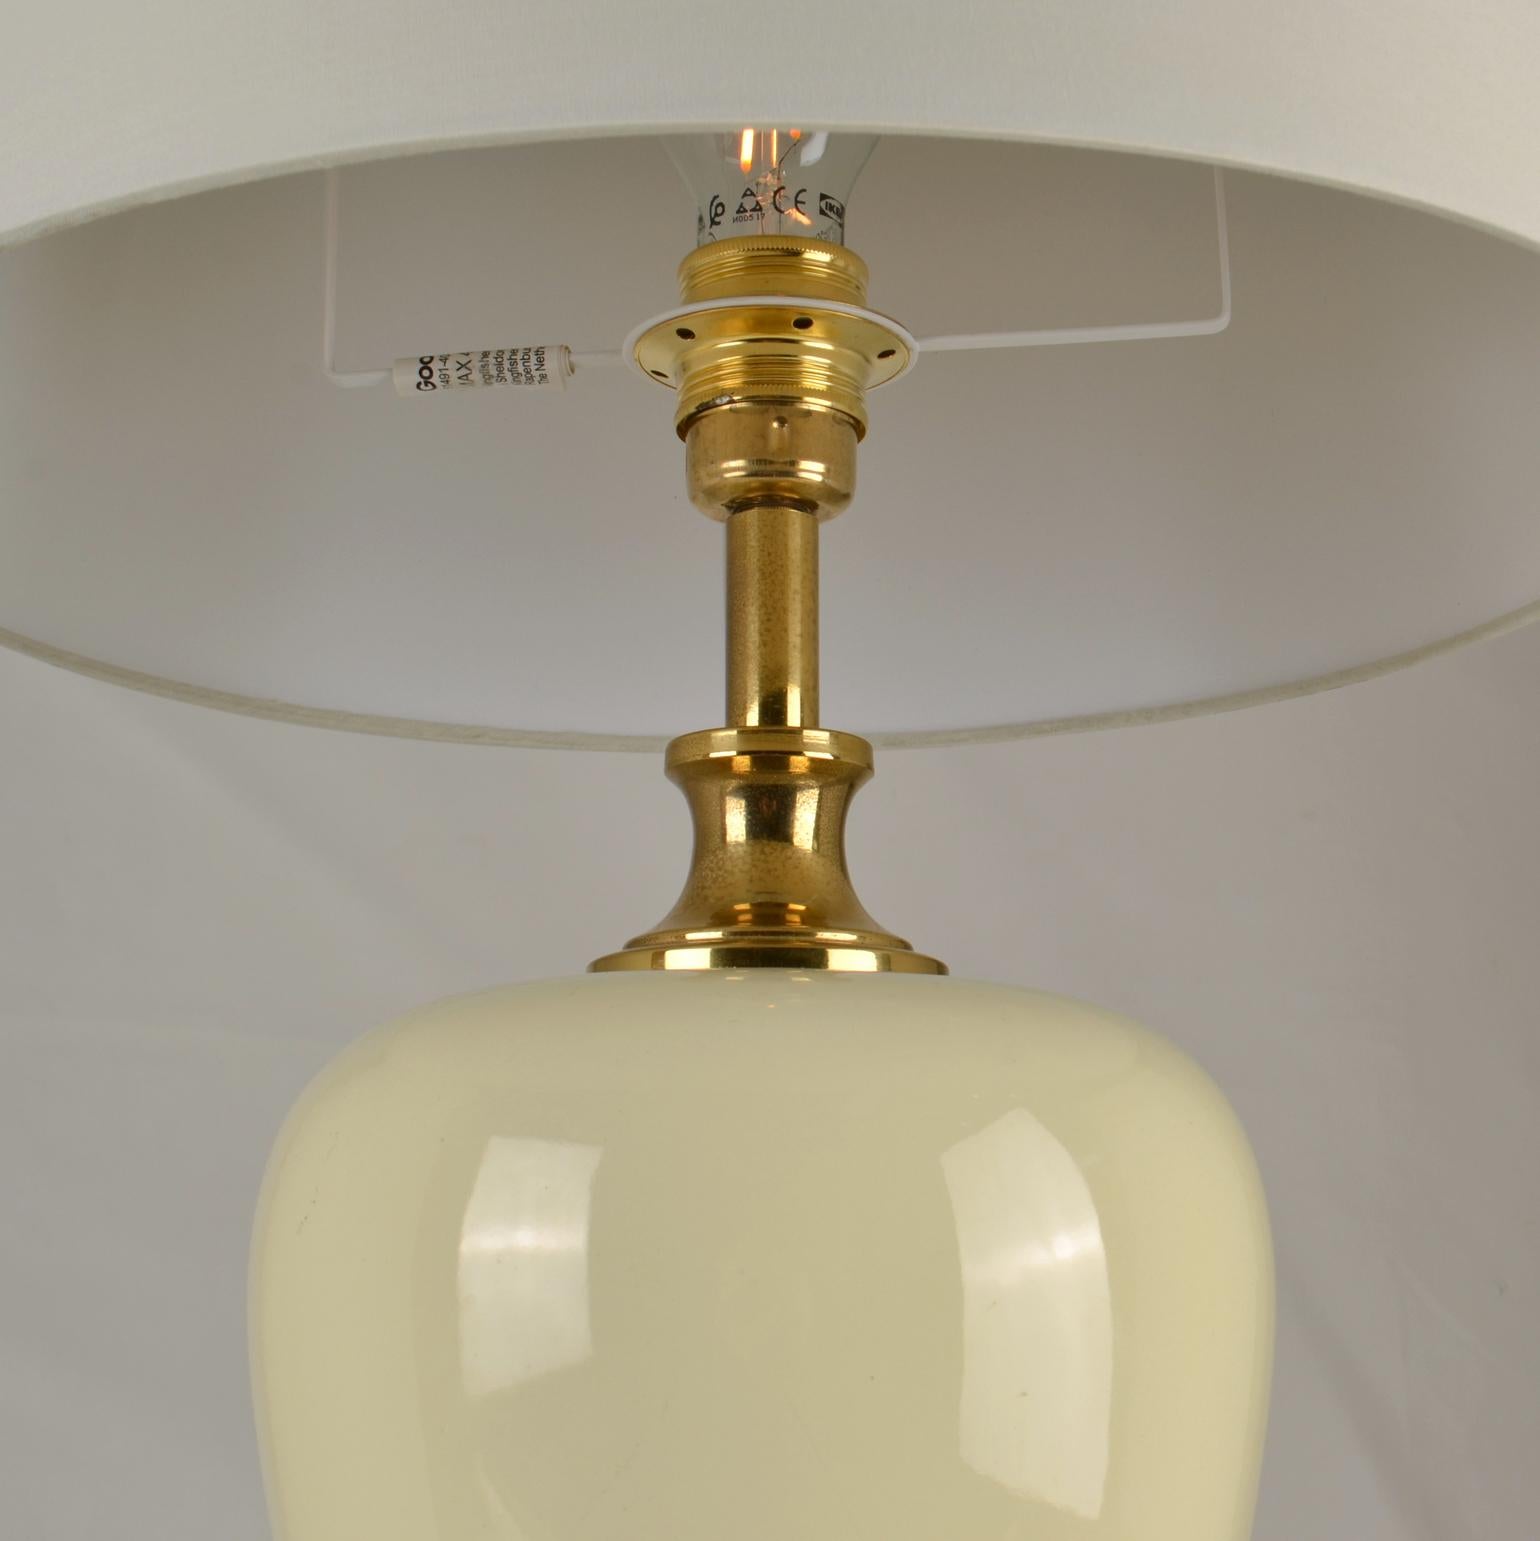 Pair of Cream Porcelain and Brass Table Lamps by Zonca, Italy, 1970s For Sale 8